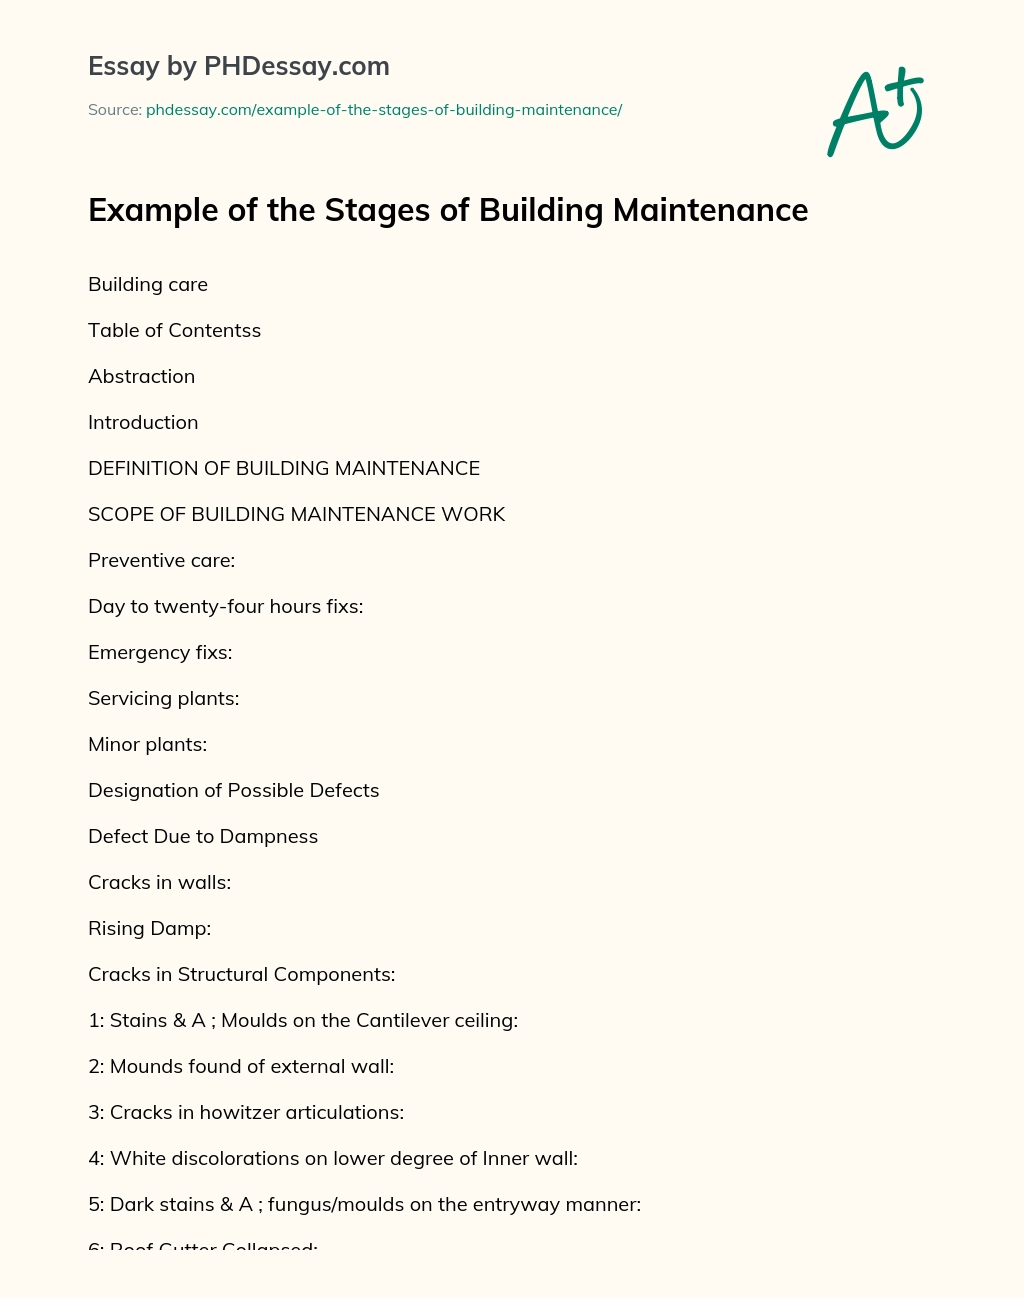 Example of the Stages of Building Maintenance essay